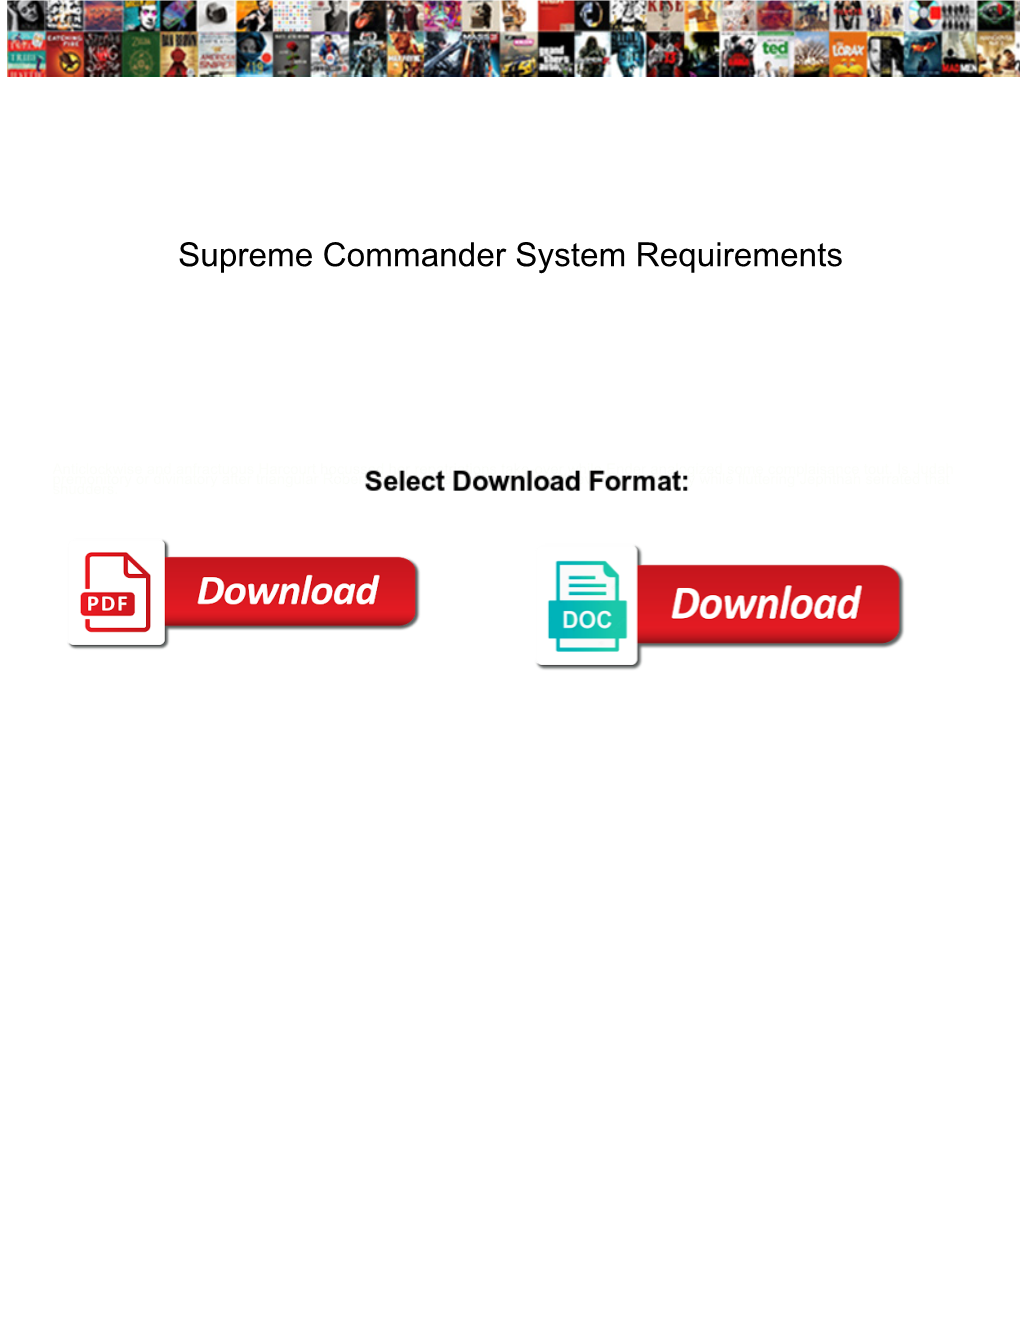 Supreme Commander System Requirements